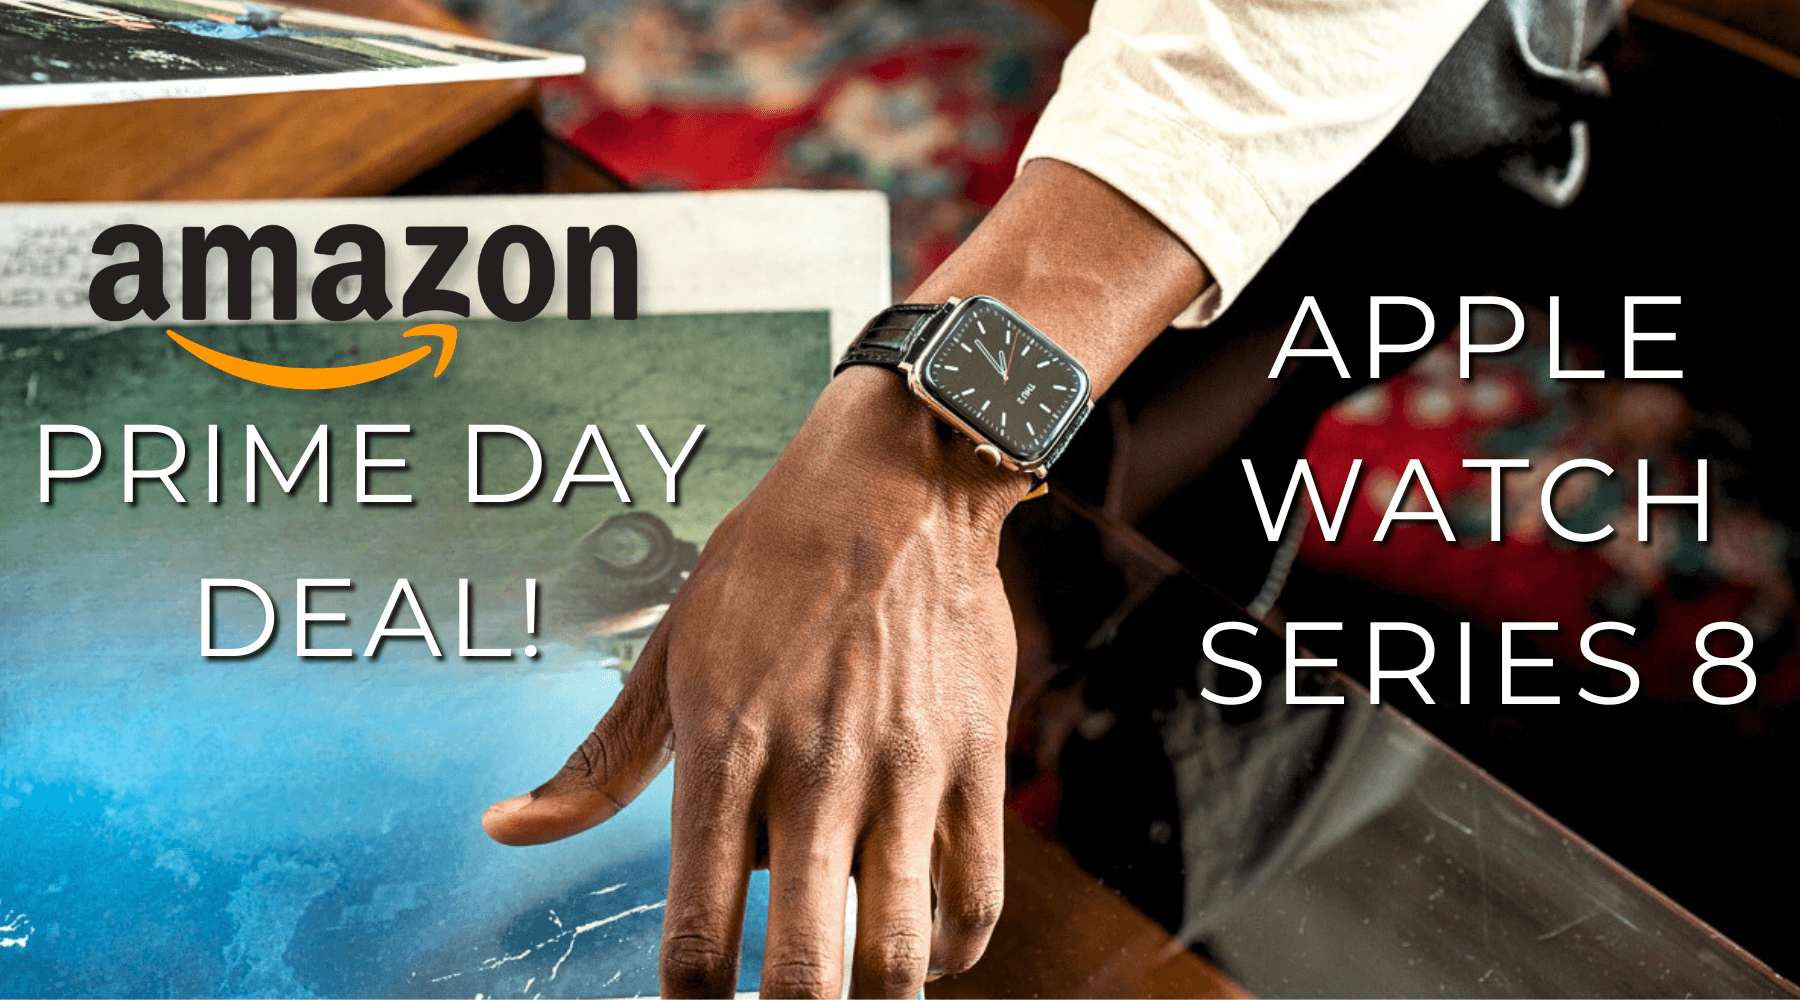 Apple Watch Series 8 Plummets in Price Ahead of Amazon Prime Day! - Buckle and Band